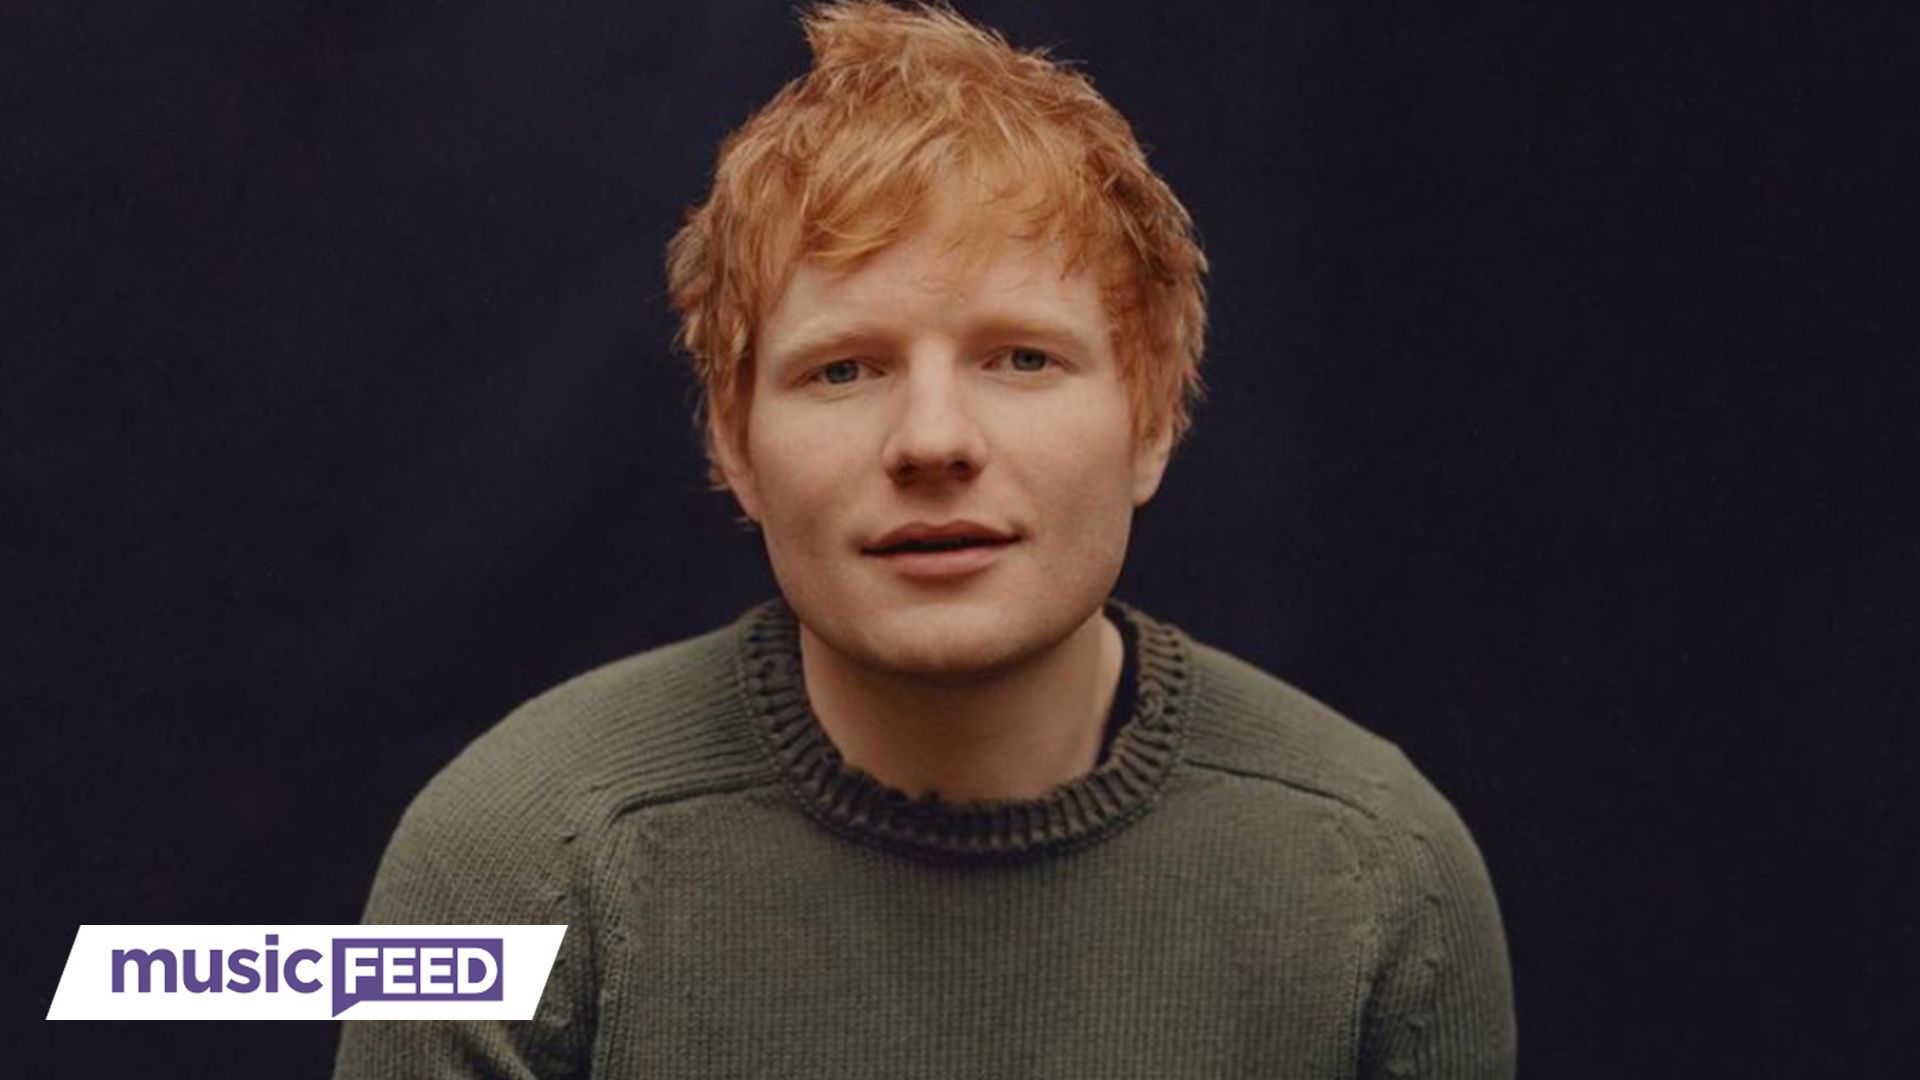 Who Is Cherry Seaborn, E﻿﻿d Sheeran's Wife?